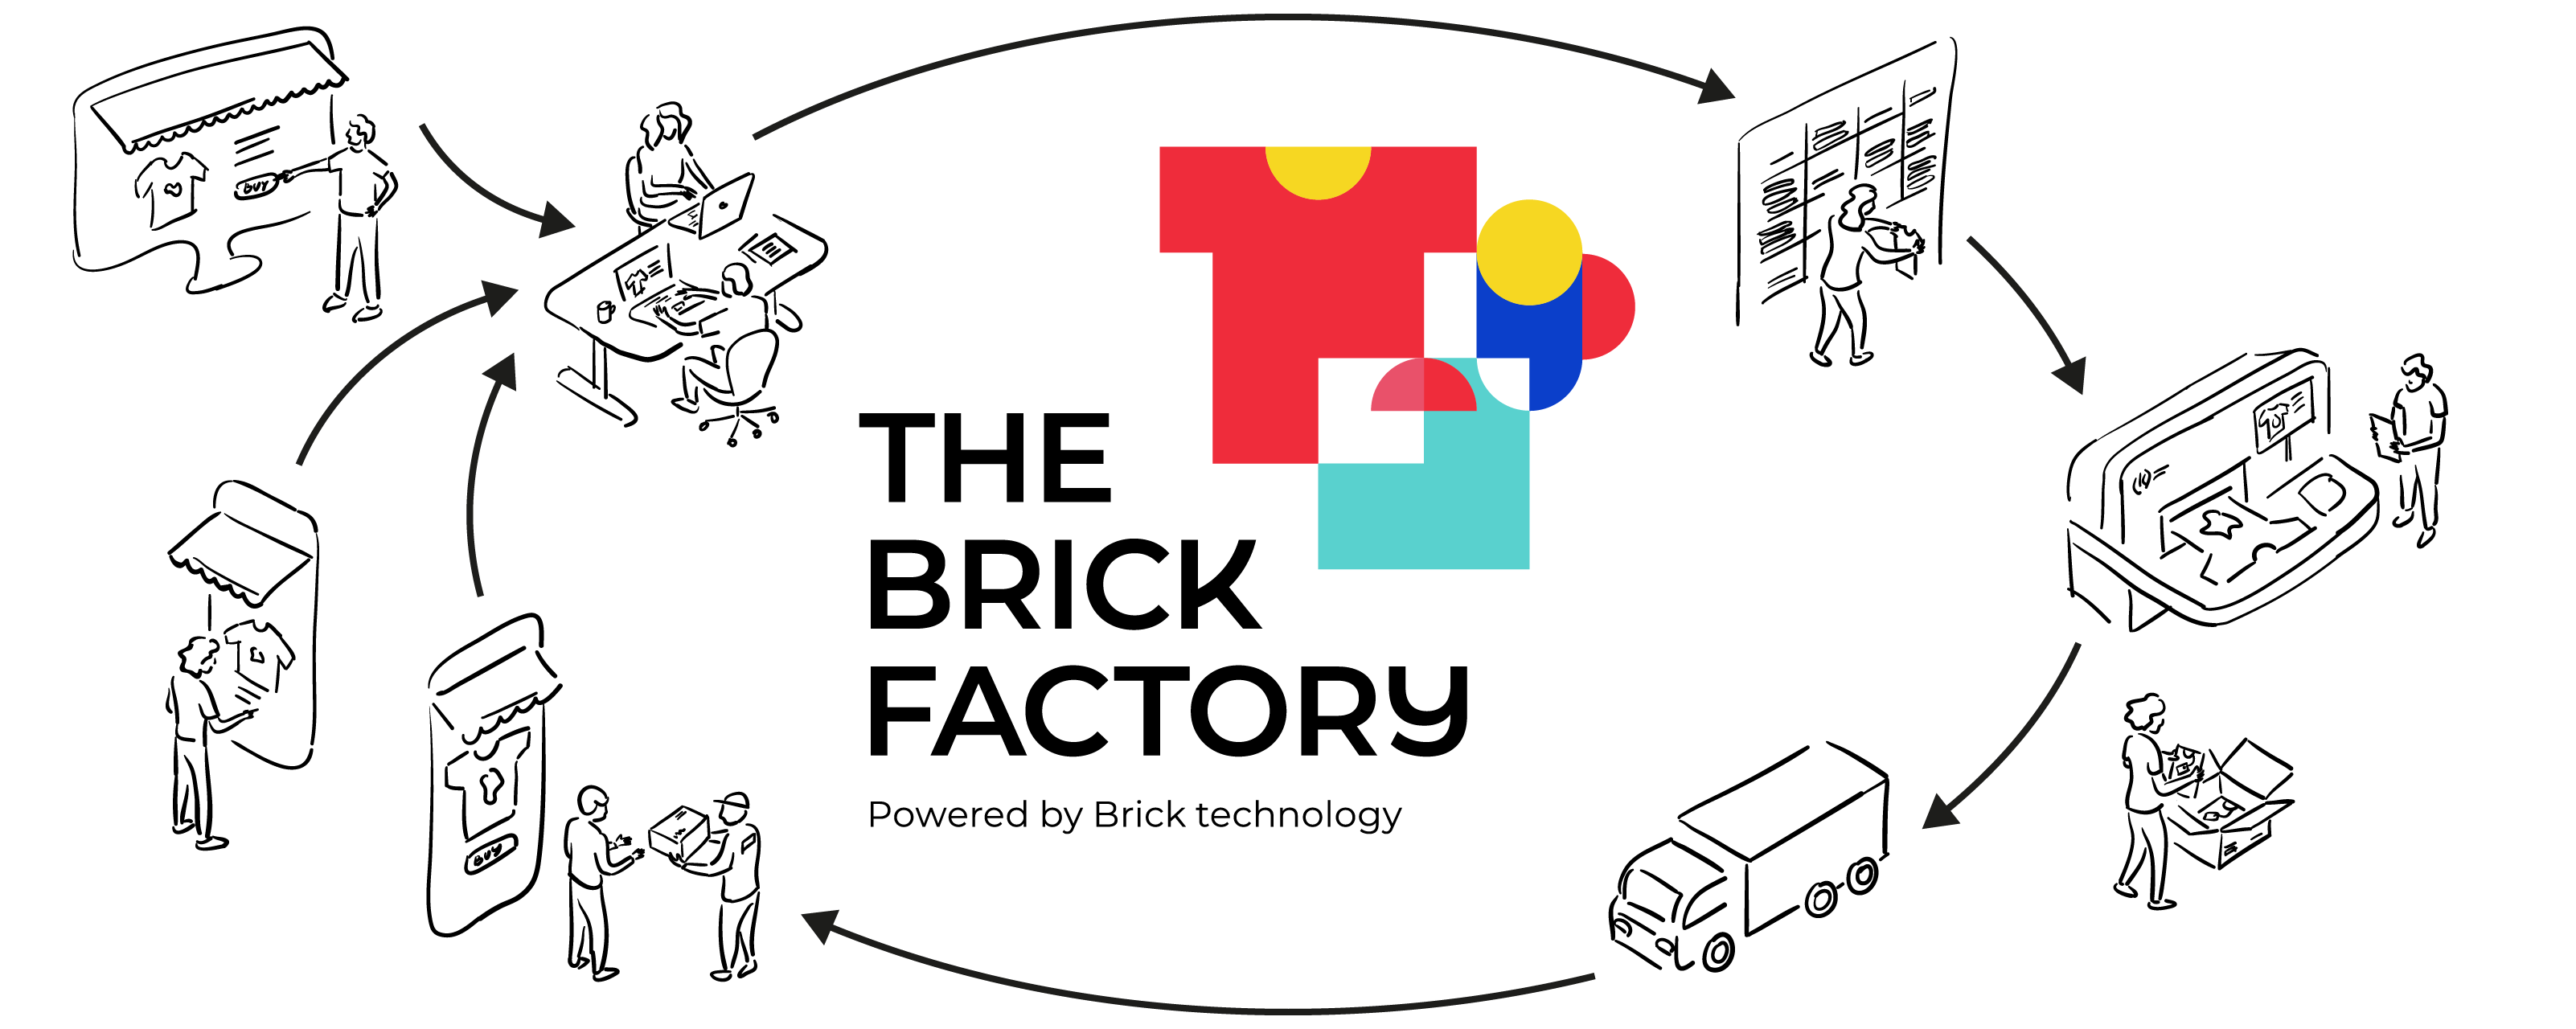 Introducing The Brick Factory